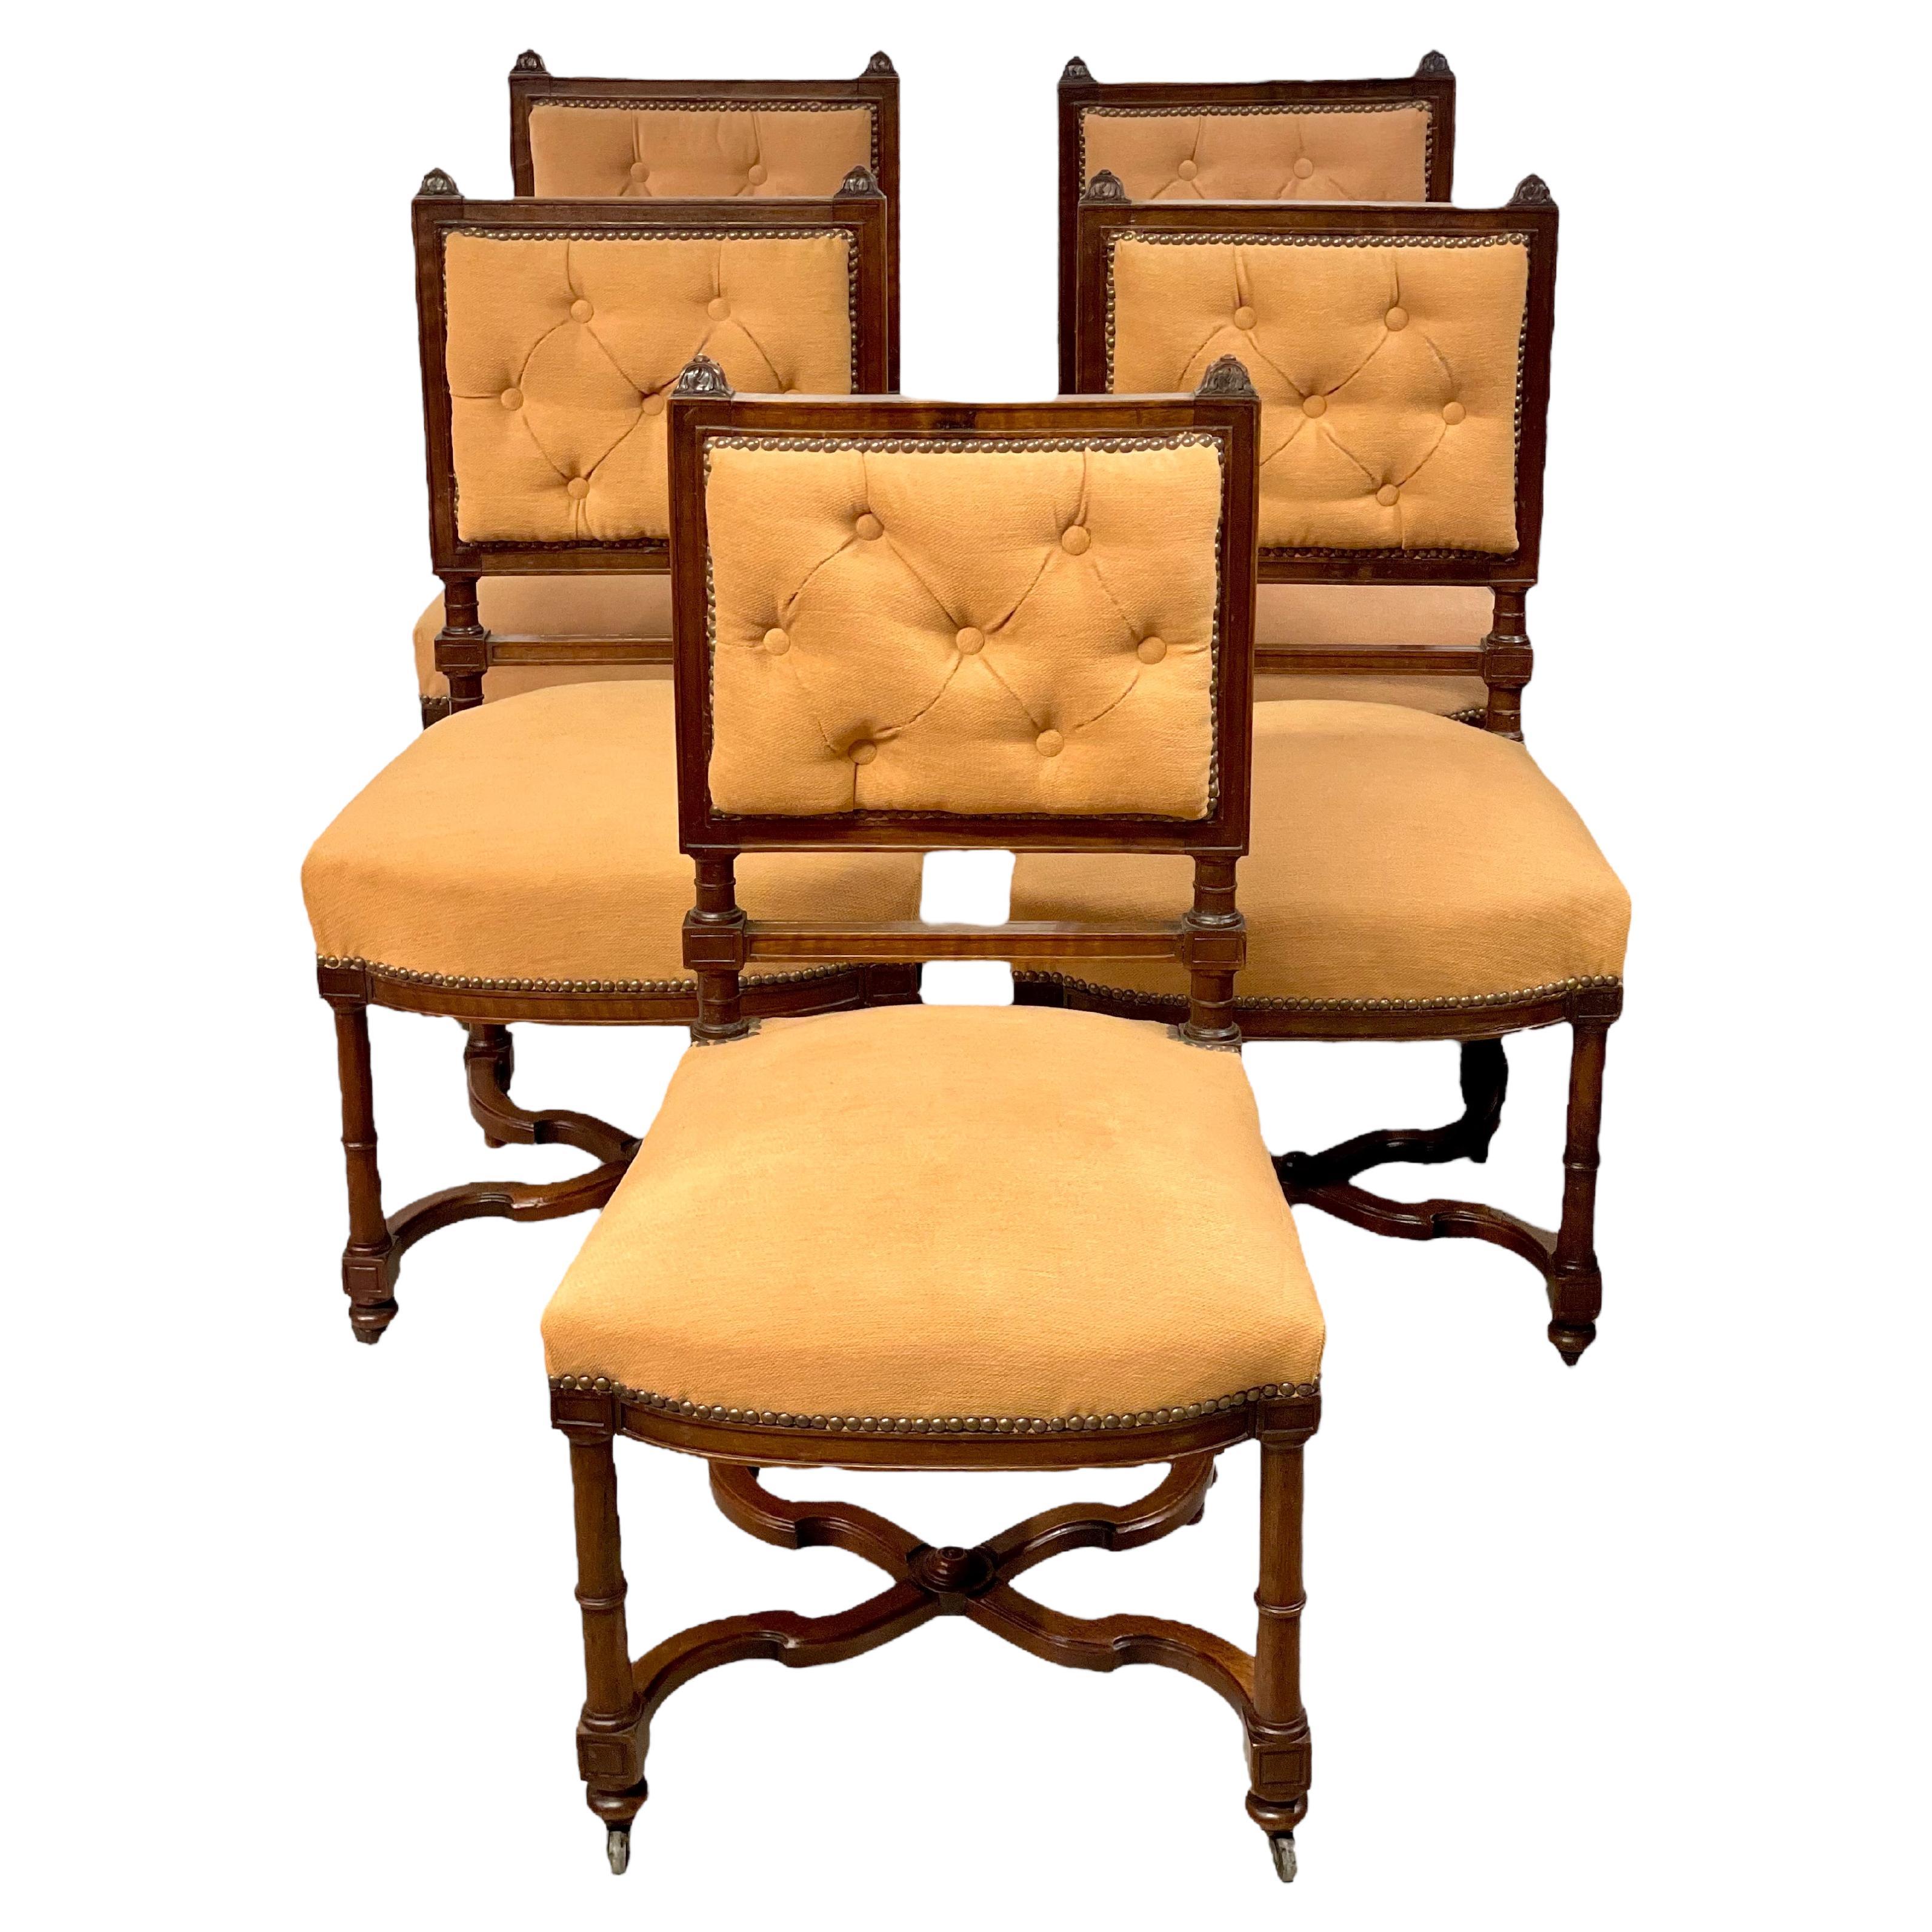 A very stylish set of five Louis XIII-style dining chairs, each one featuring a padded scrolled button back and over-stuffed seat, upholstered in a pale gold fabric and secured all round with nailhead trim. The chair legs are slim and beautifully